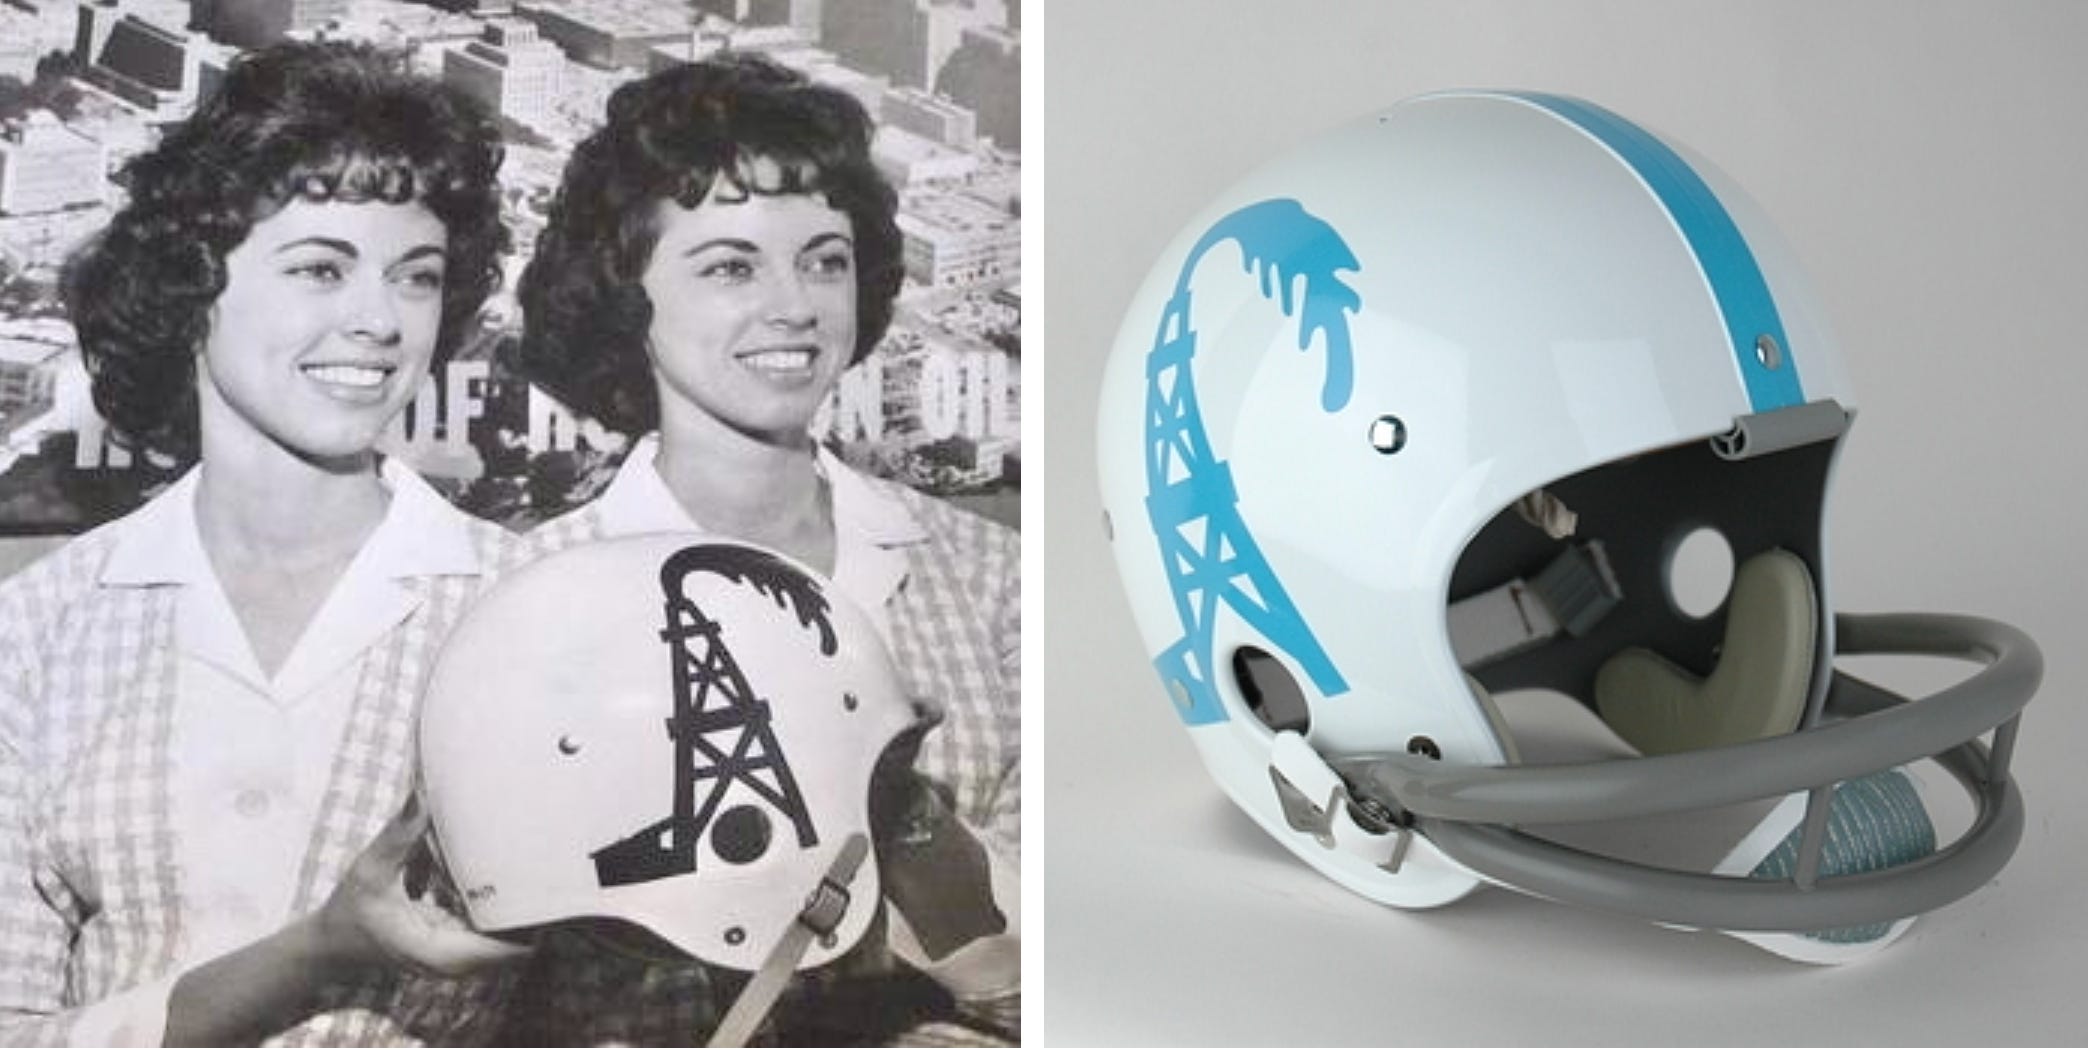 A Deep Dive on the Houston Oilers’ Uniforms by Paul Lukas